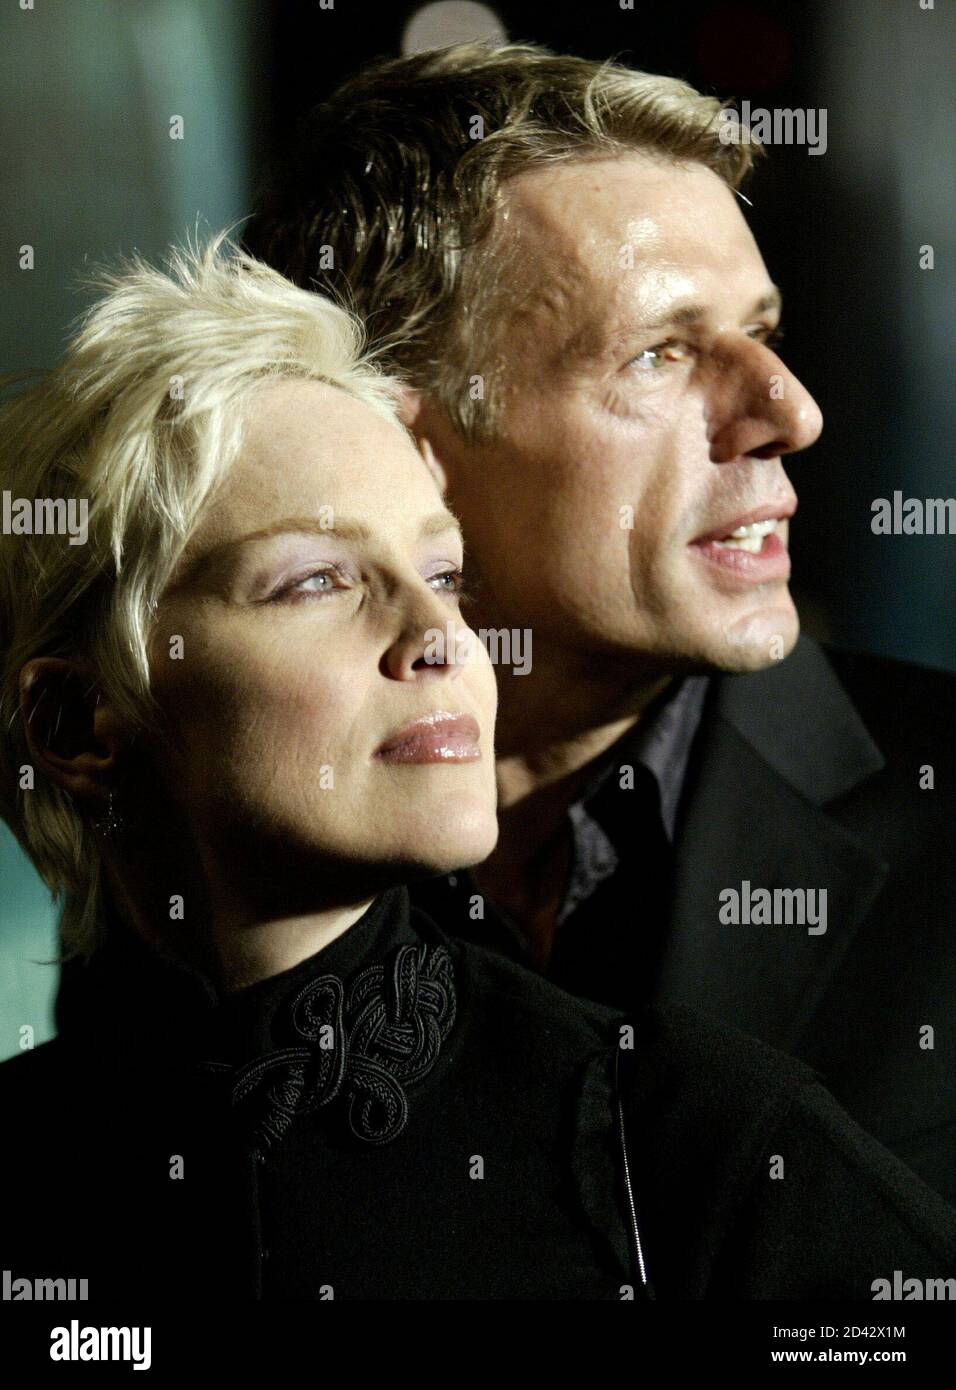 Lambert Wilson (R), a cast member in the sci-fi action thriller motion picture 'The Matrix Revolutions,' poses with actress Sharon Stone as they arrive during the premiere of the film, at the Disney Concert Hall in Los Angeles, California, October 27, 2003. Stock Photo